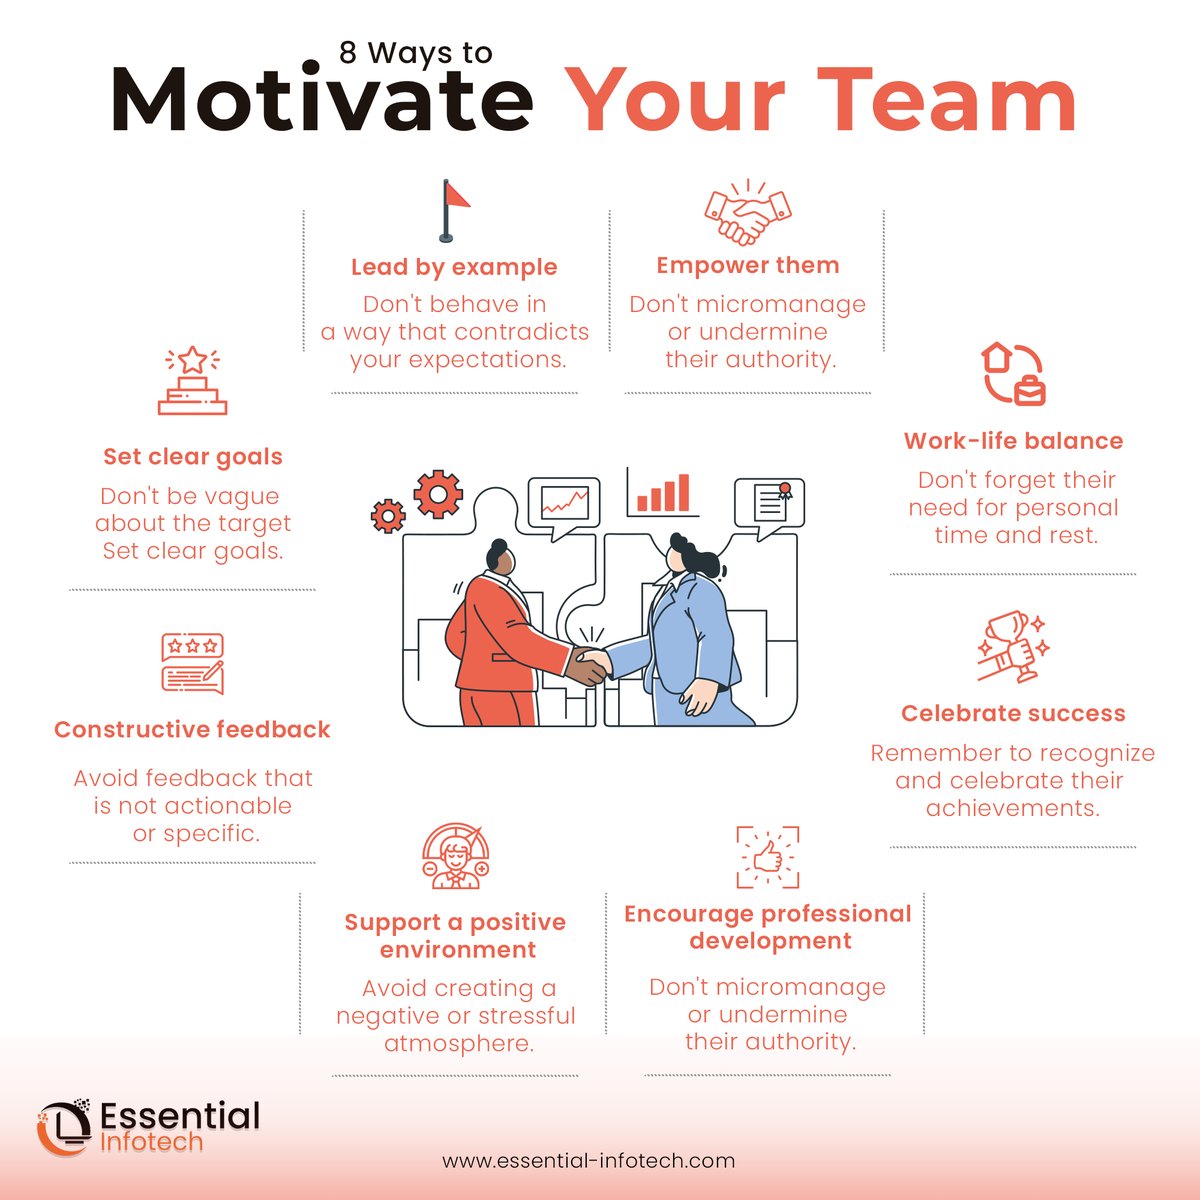 'Strength in unity, motivation in teamwork! 📷📷 Let's uplift and empower each other to reach our collective goals. 📷
#EssentialInfotech #ISOCertified #IoTSERVICES #INDUSTRIALAUTOMATION #USELOCAL #NOTGLOBAL #INDUSTRY4_0 #DATA  #TeamSpirit #motivation #Bpo #Basis #Bacco